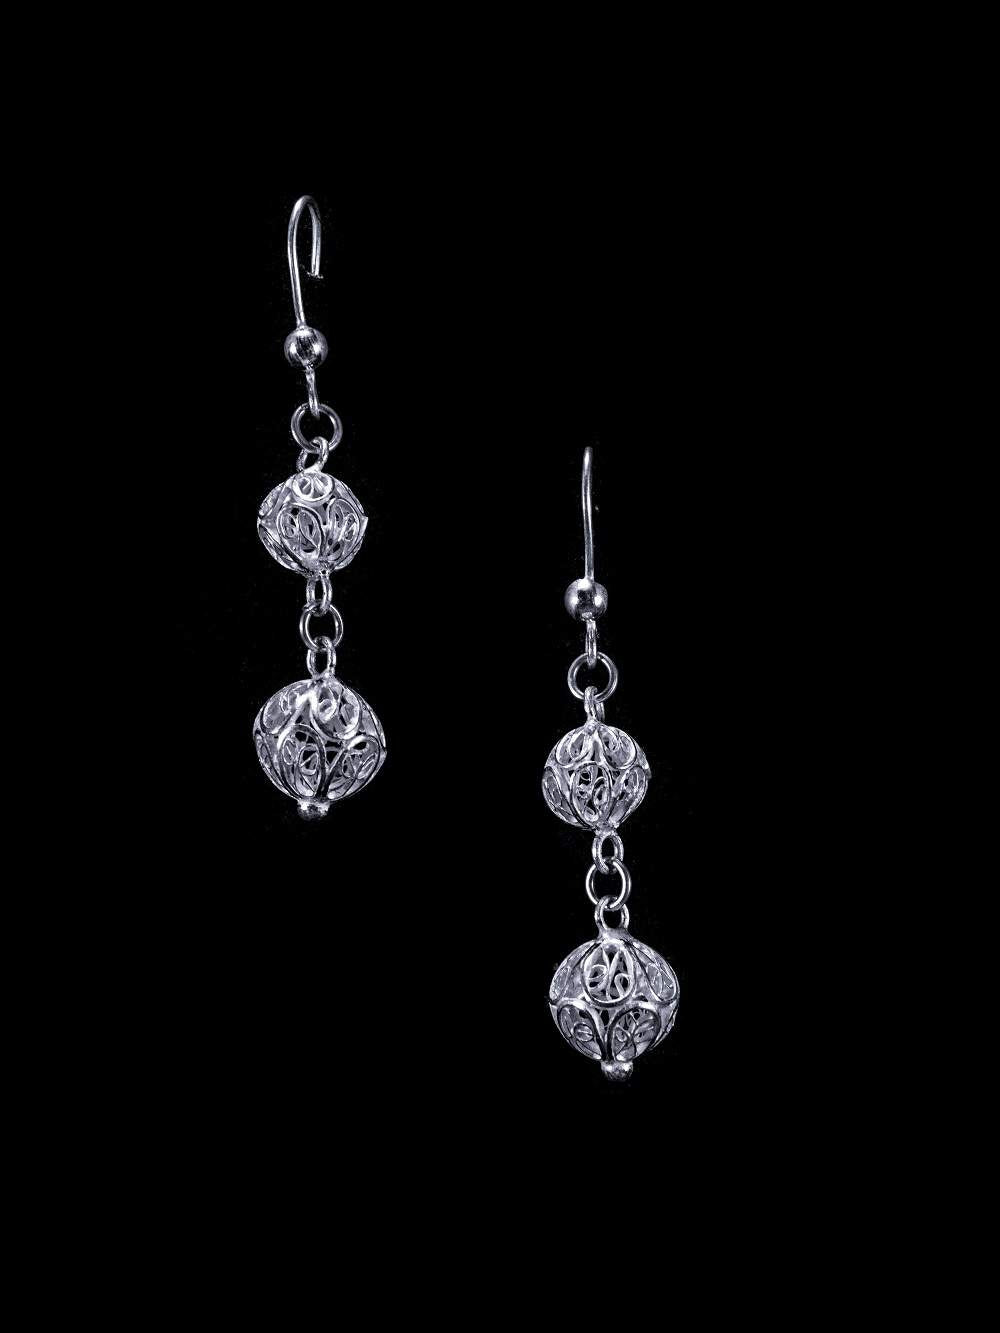 925 silver earrings - Findings |Diary jewelry design - France Perles -  World of pearls